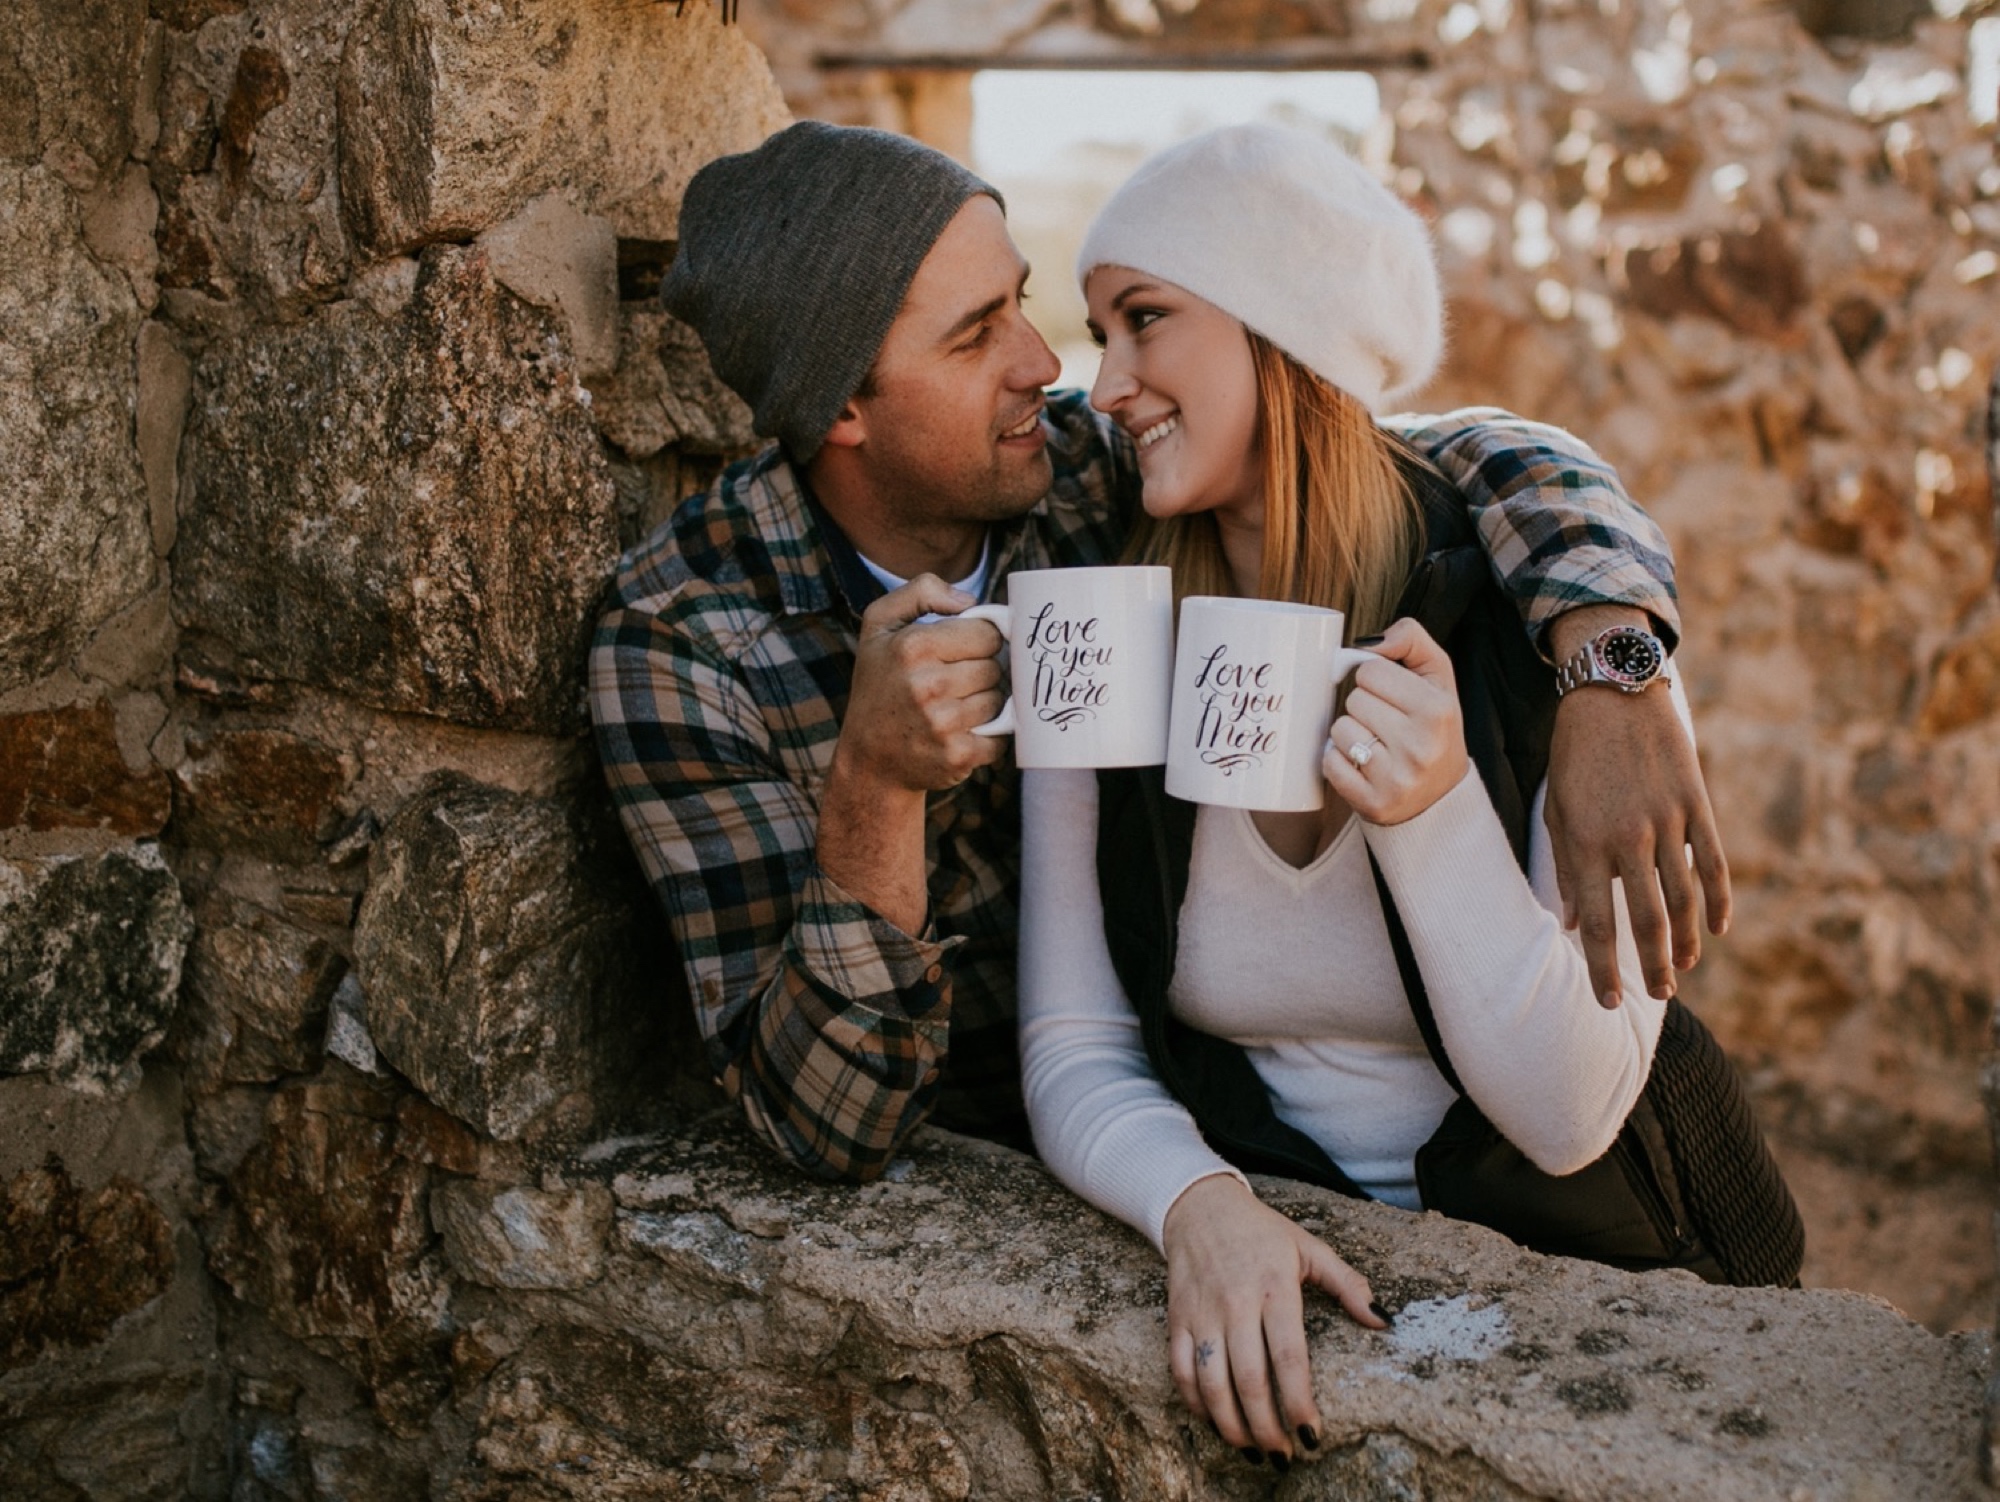  We took a drive to the Sandia Rockhouse to capture Chris and Kymbrye’s beautiful engagement photos in Albuquerque, New Mexico. Chris and Kymbrye brought some serious cuteness for their epic engagement session! I love the rustic, cozy theme they chos